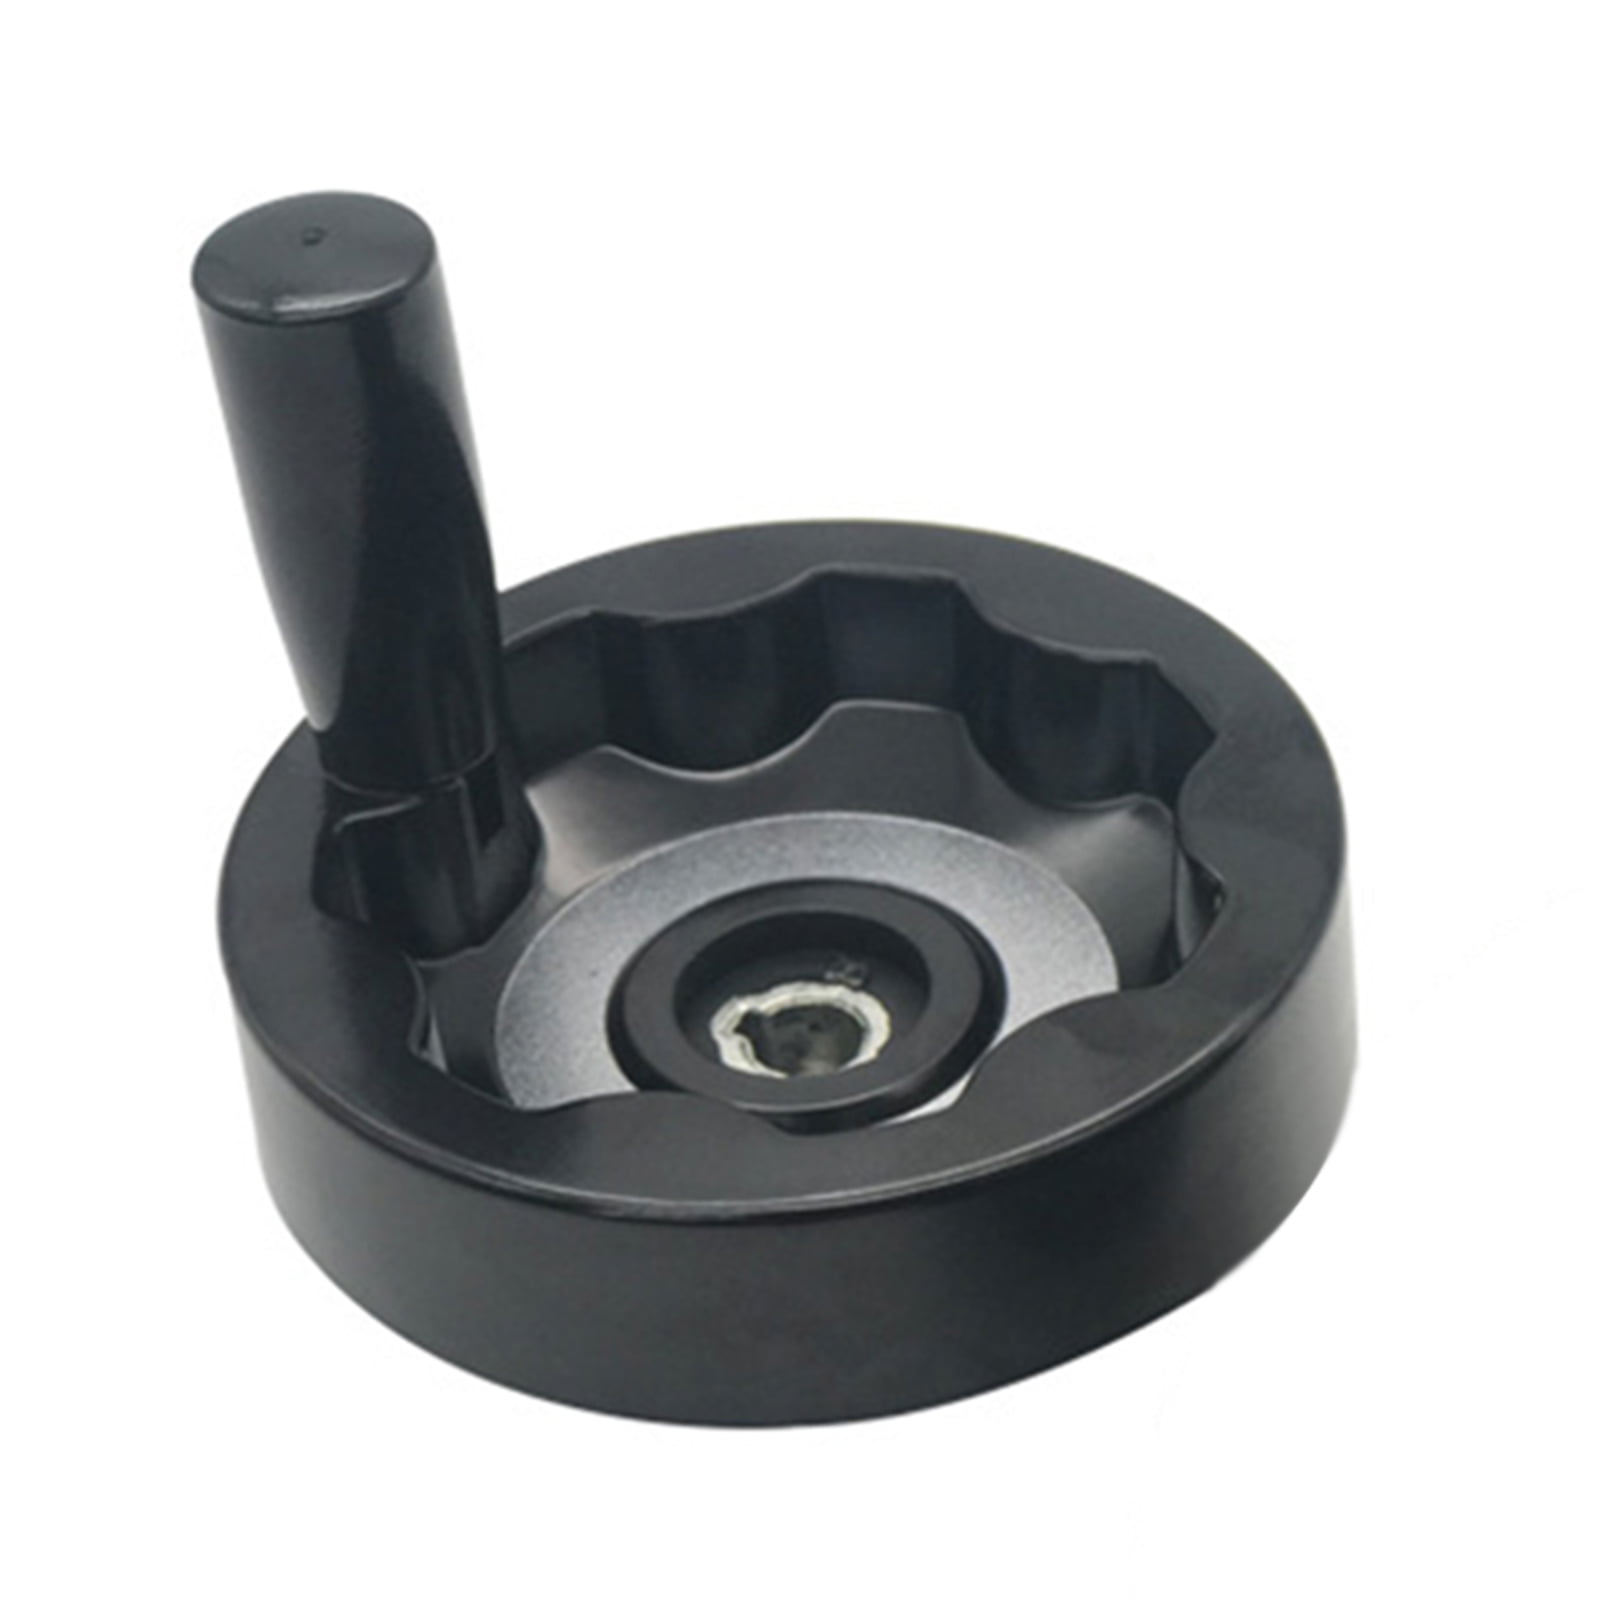 Black Lathe Hand Wheel,12x100mm Strong Insulation Round 3 Spoke Hand Wheel with Removable Handle Screw Hole for Lathe Milling Machine Grinders etc 